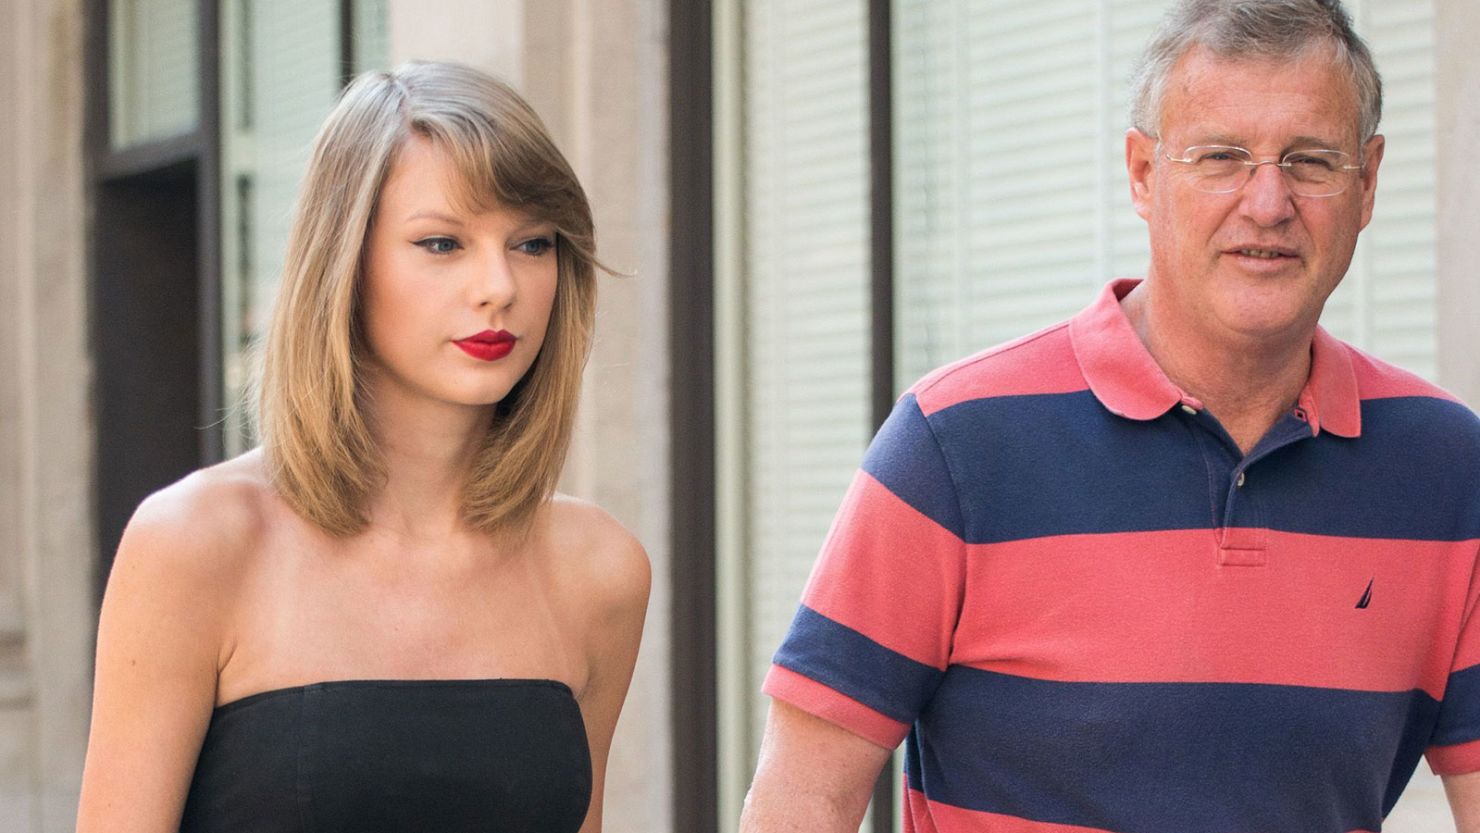 Swift and her father Scott as seen in New York.